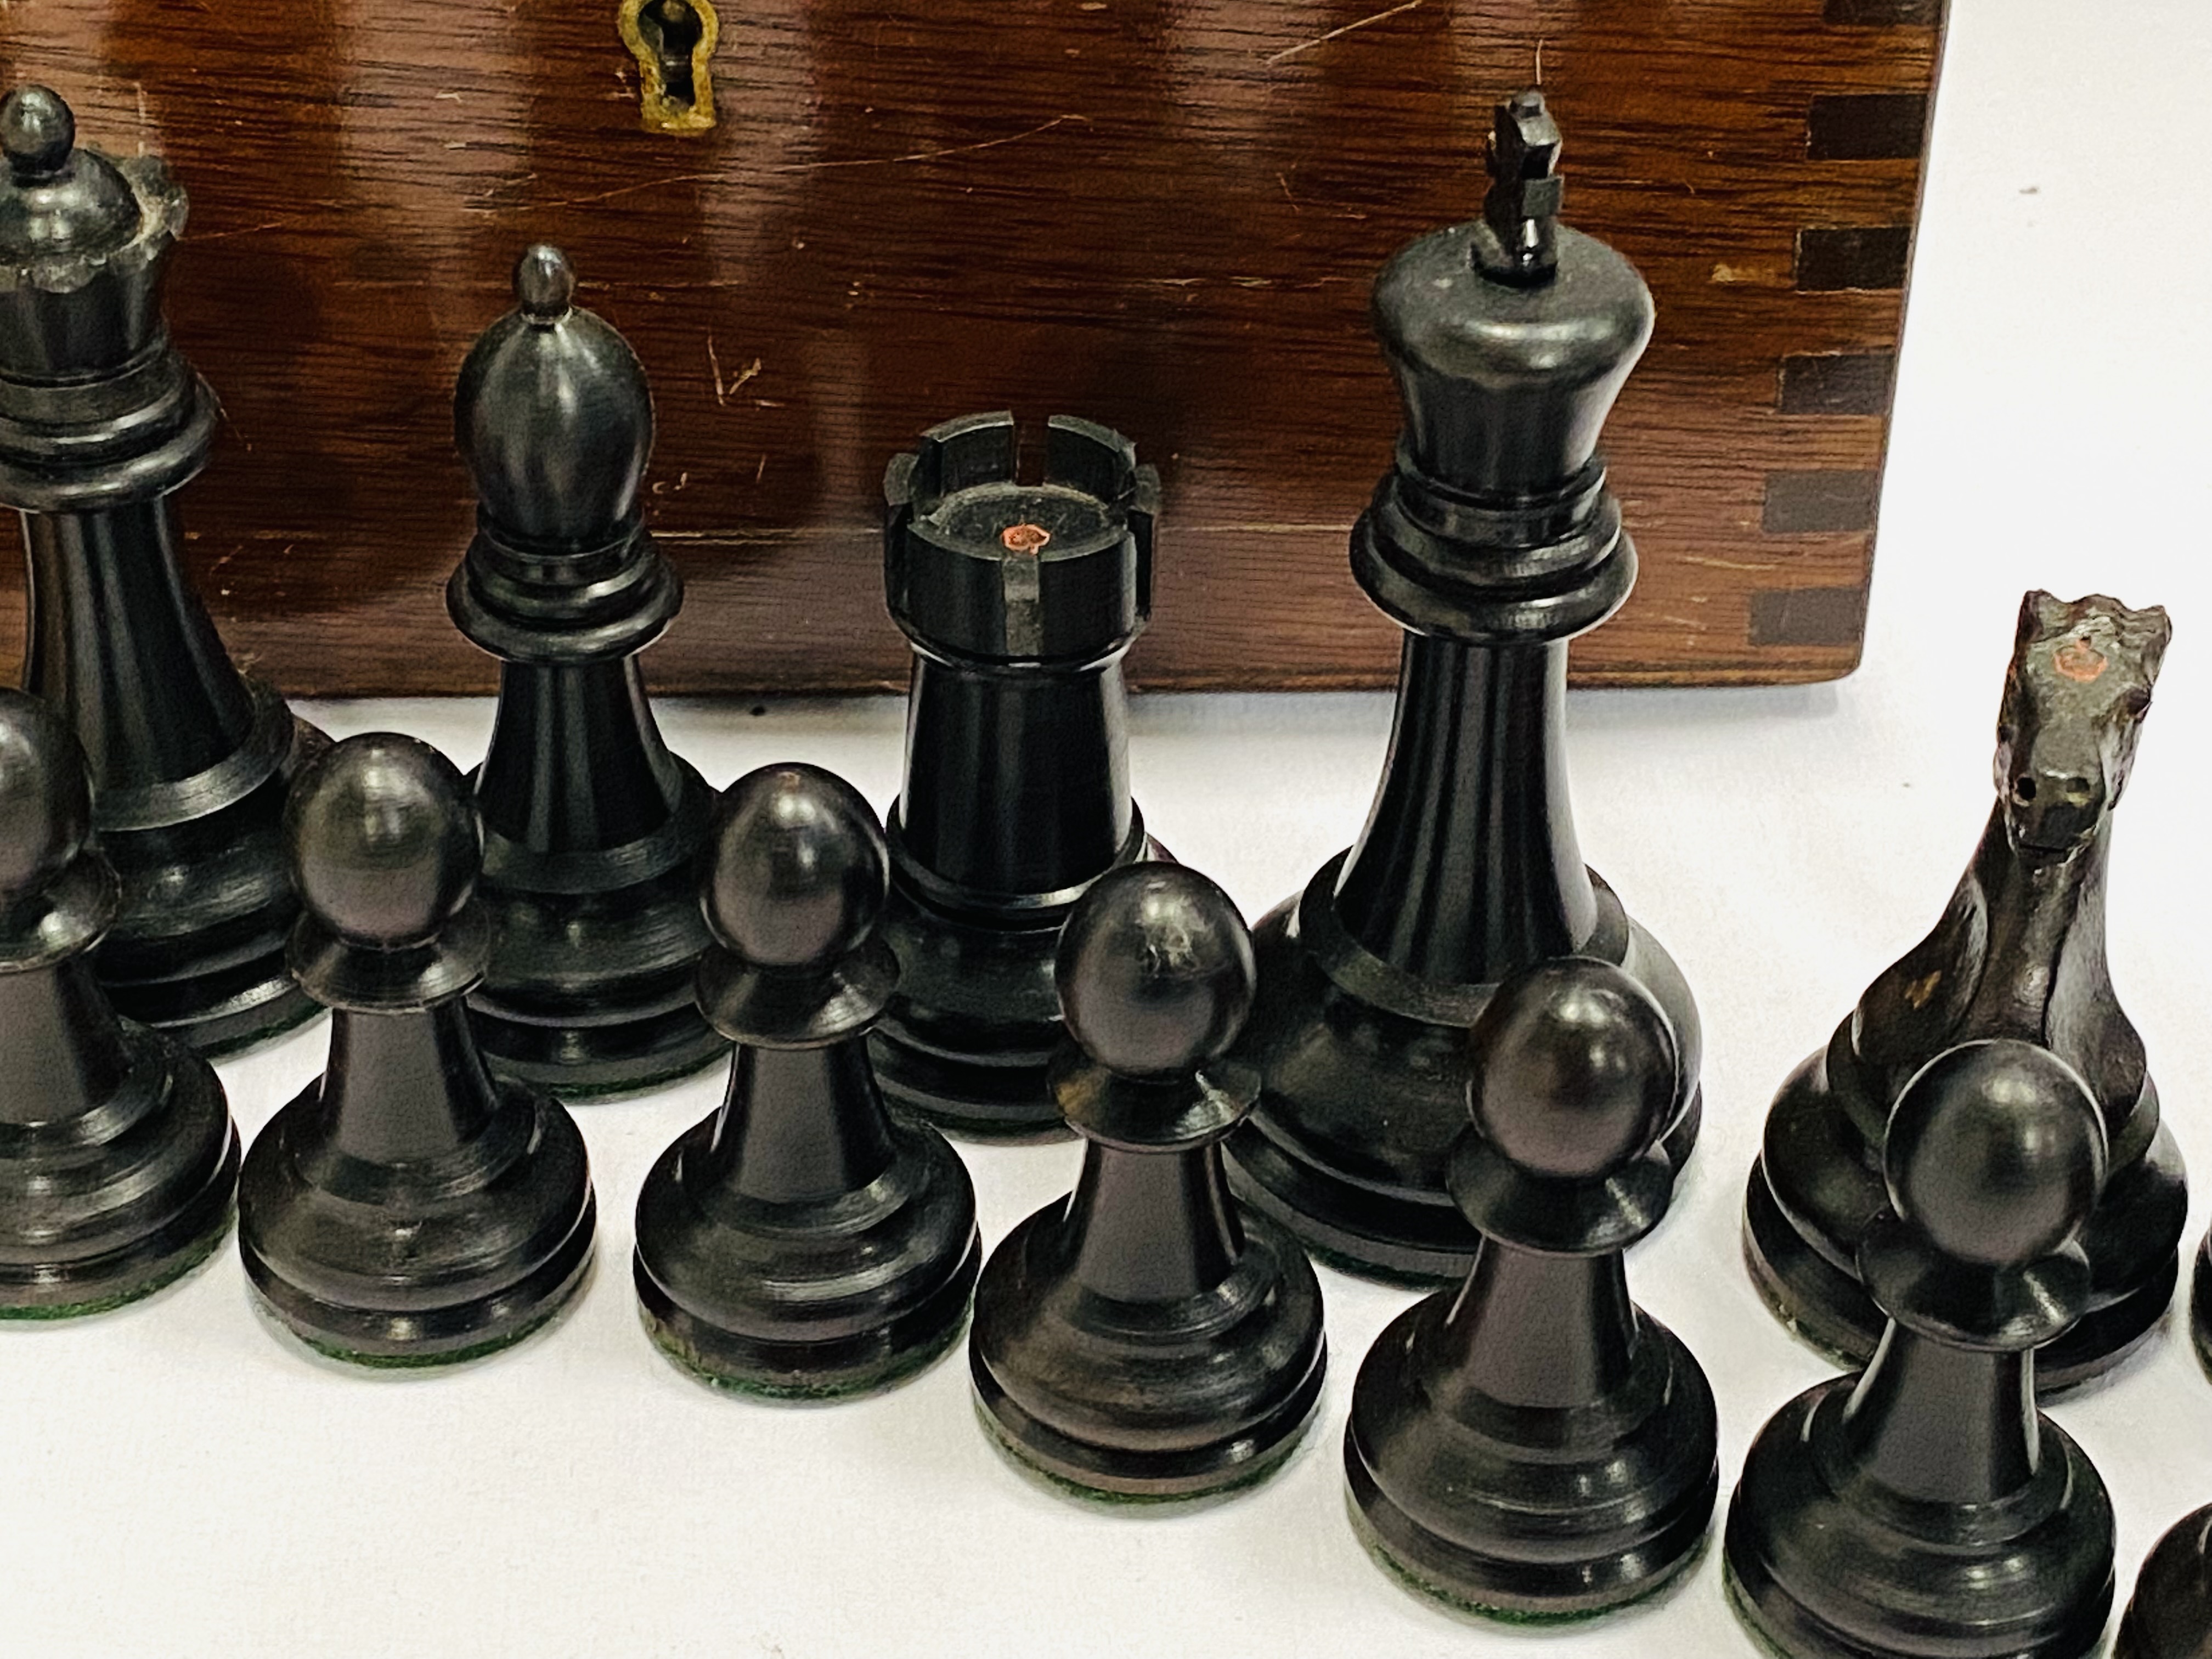 Jaques chess set - Image 3 of 6